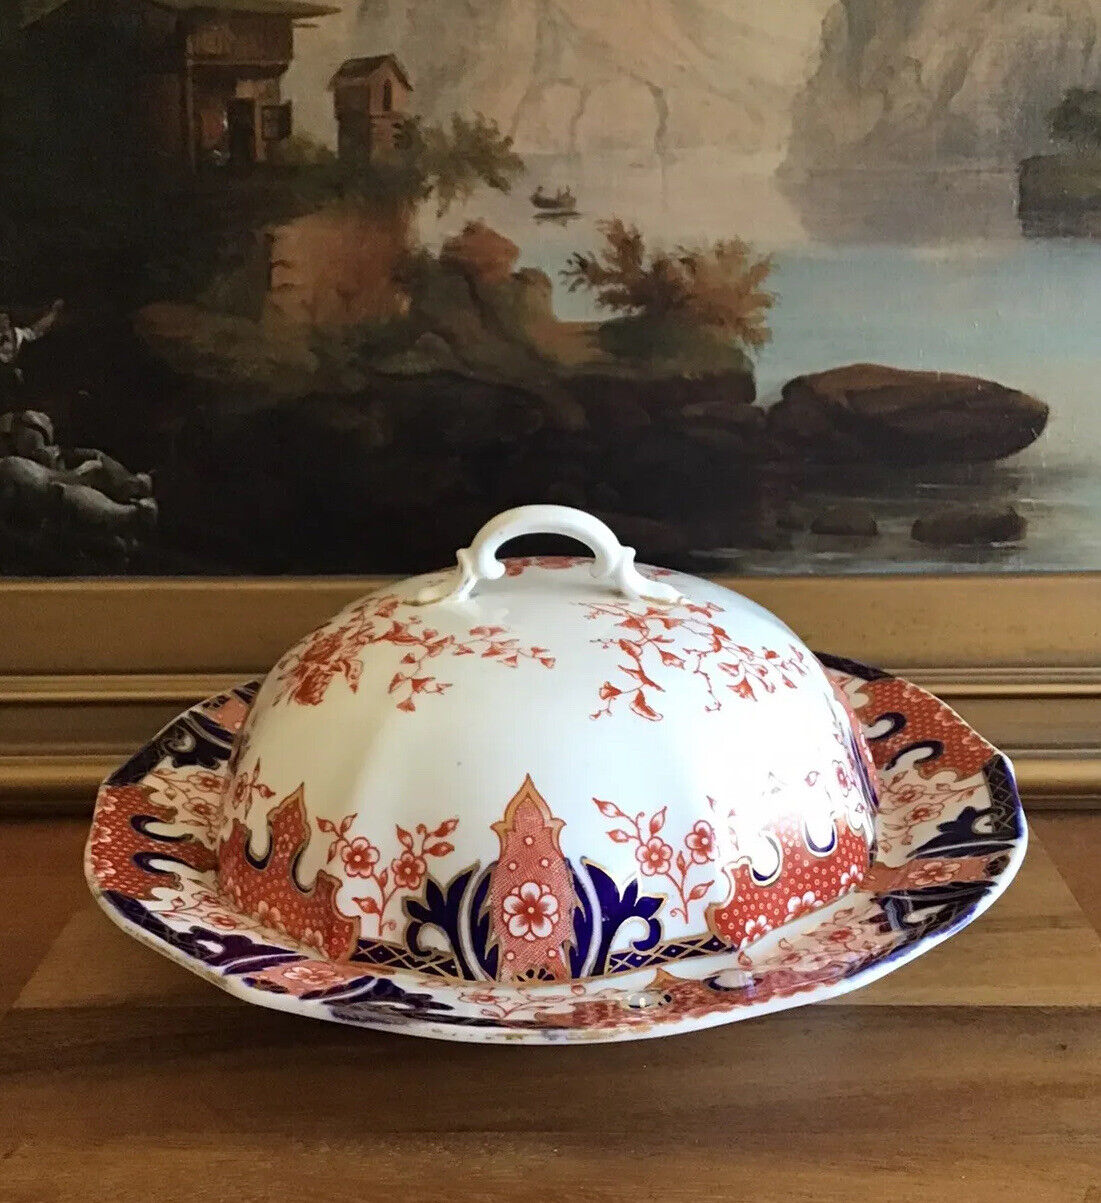 SALE Antique ROYAL CROWN DERBY Imari Domed Covered MUFFIN DISH & LID ca. 1898